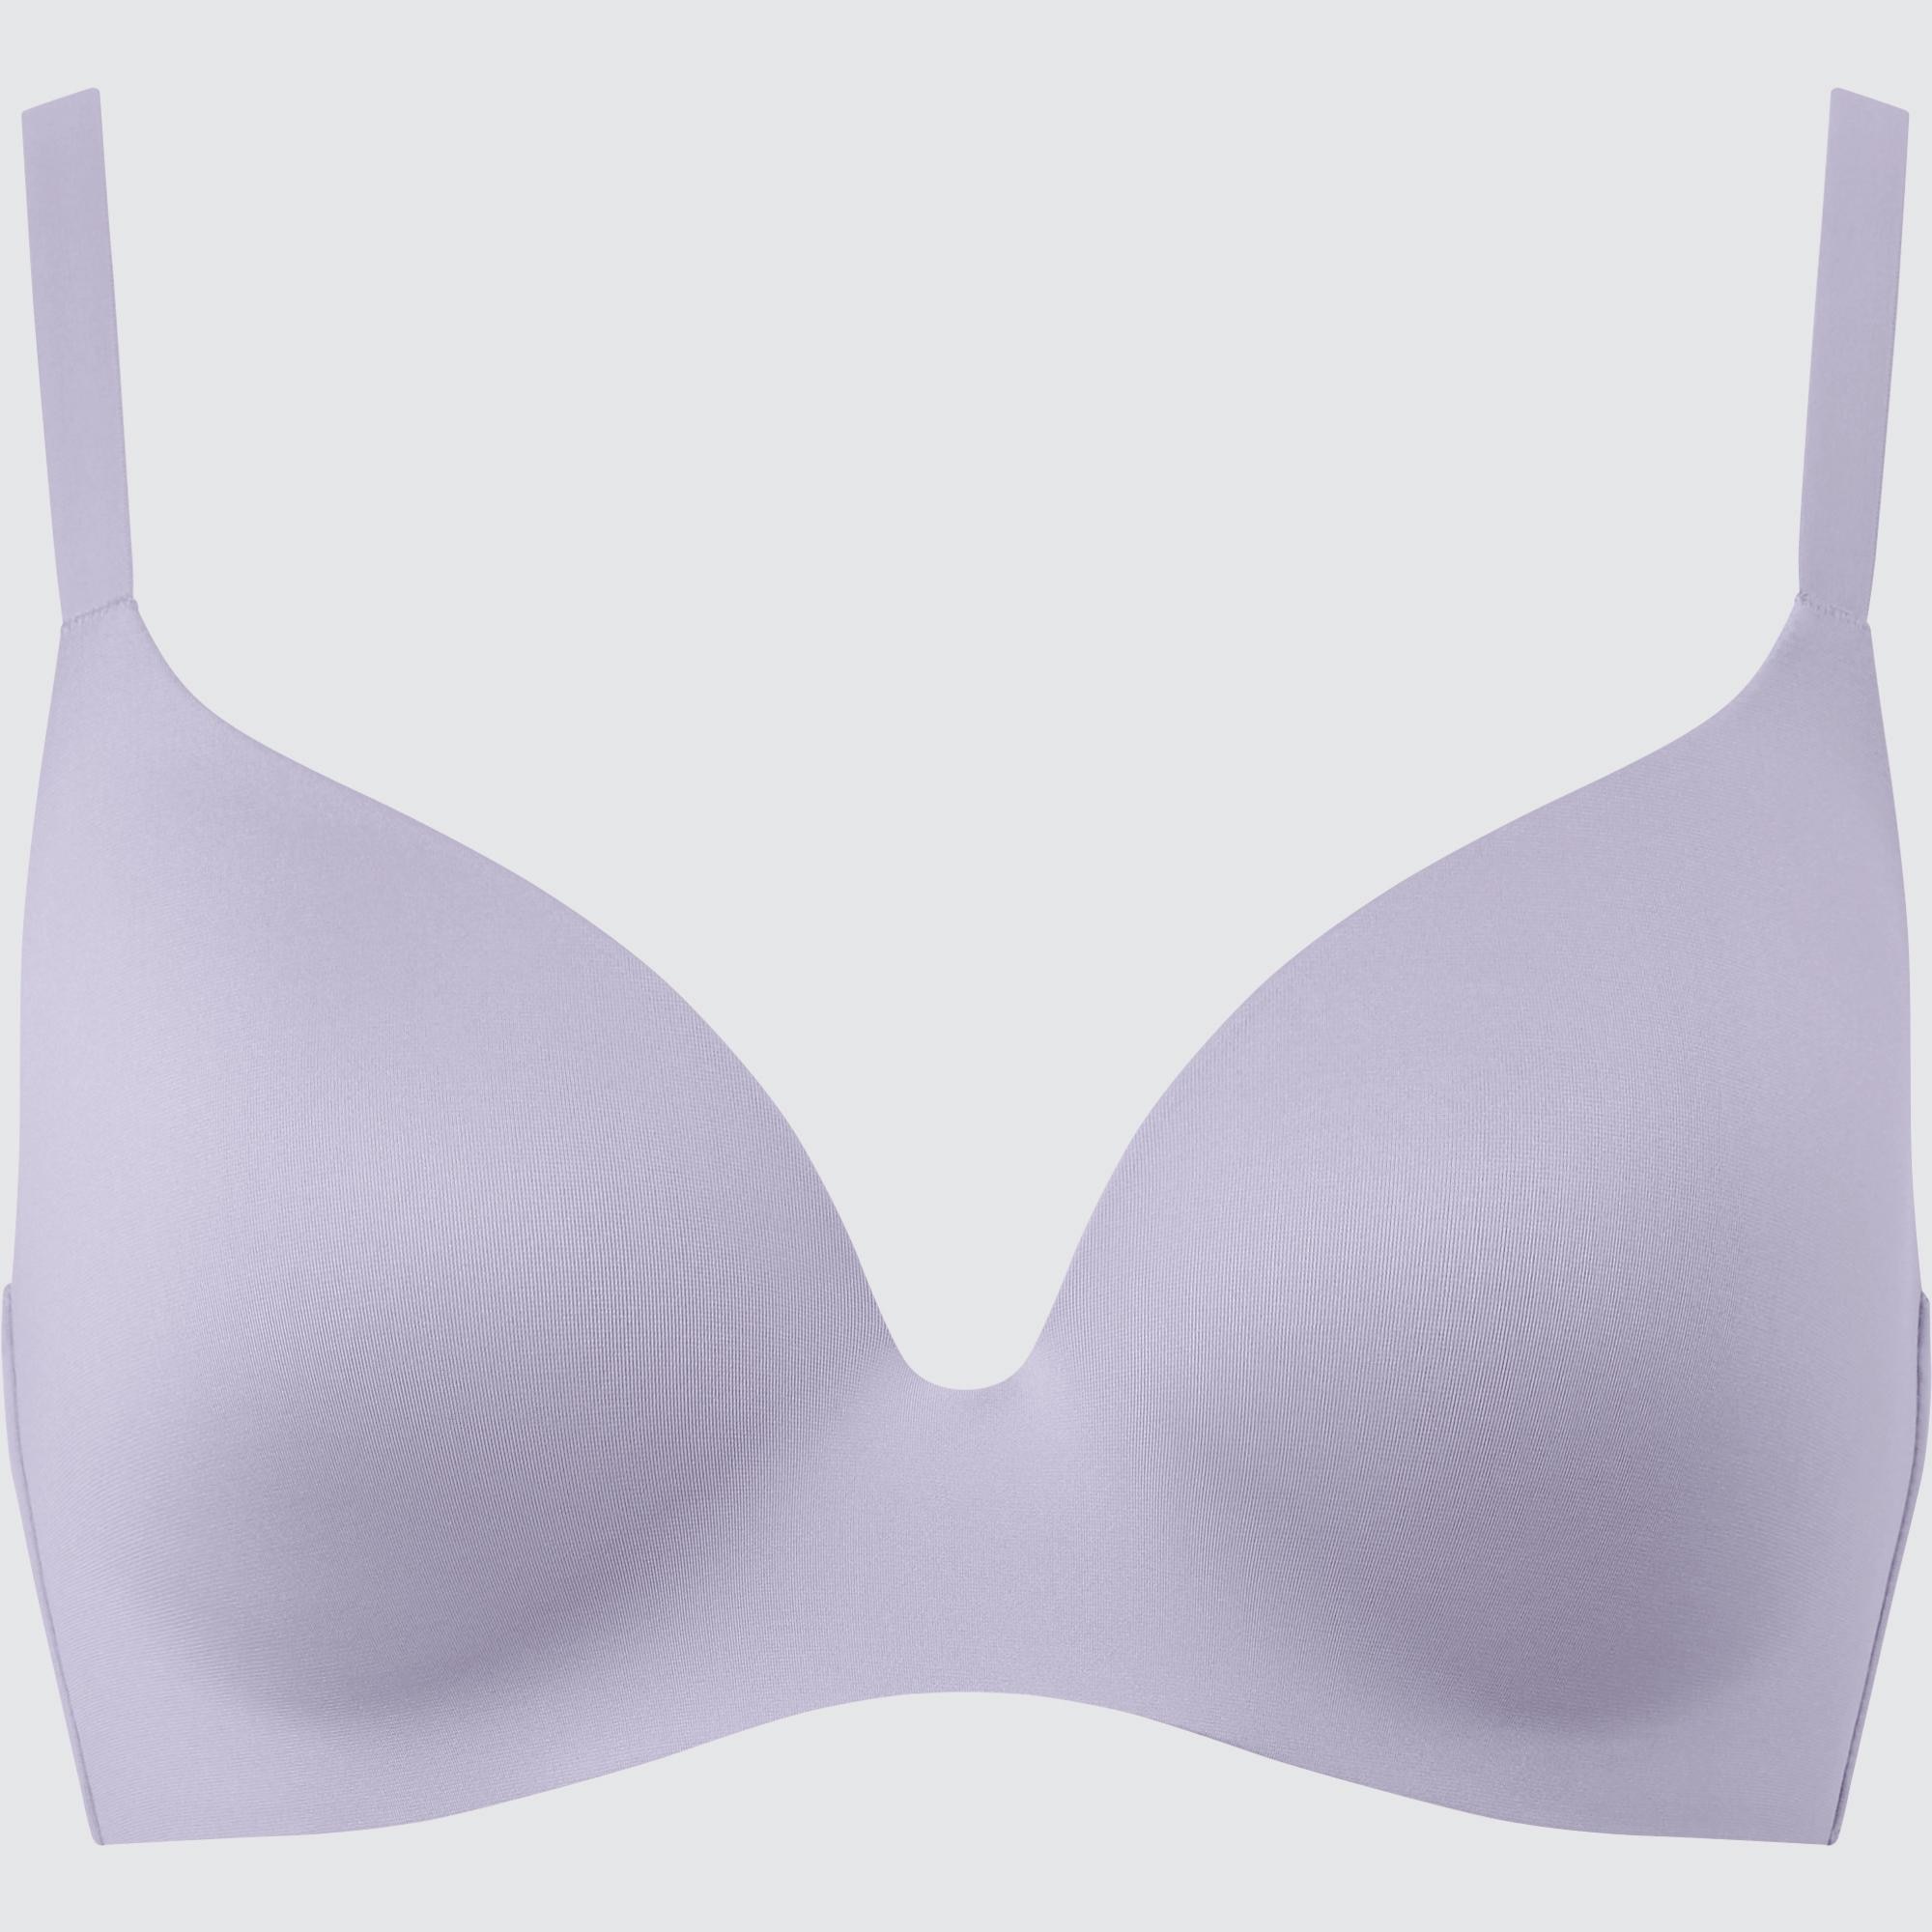 UNIQLO Global, No hook comfort wireless bra for this summer! Enjoy the  plunging lace version as it adds a little chic to your innerwear. #UNIQLO  #Lifewe